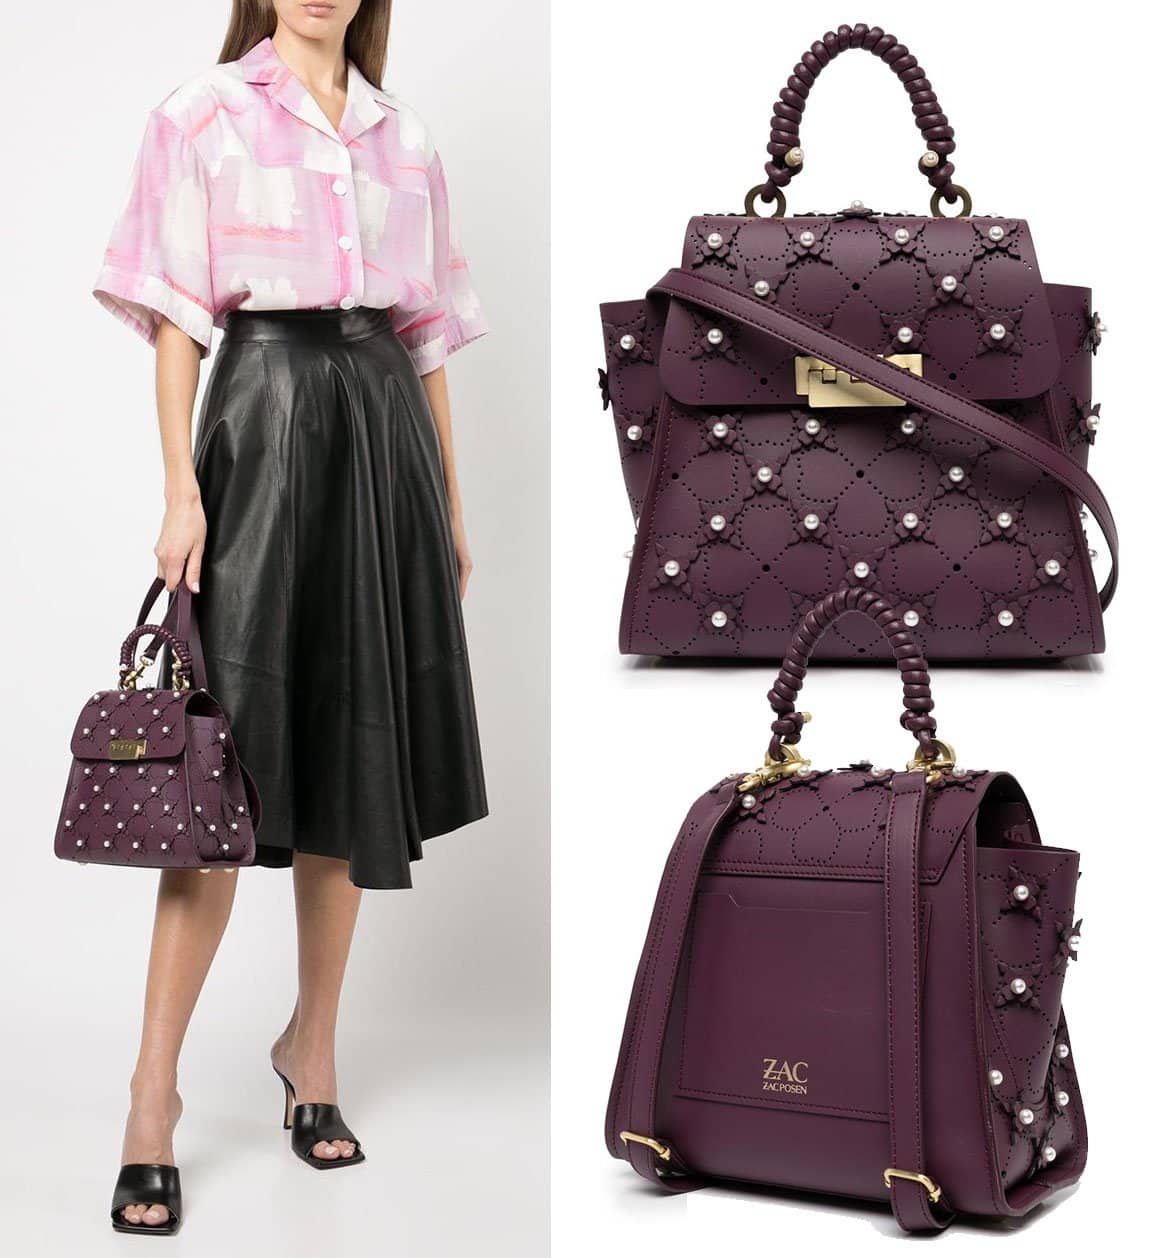 A chic convertible backpack from Zac Posen featuring faux pearls and floral laser-cut detail